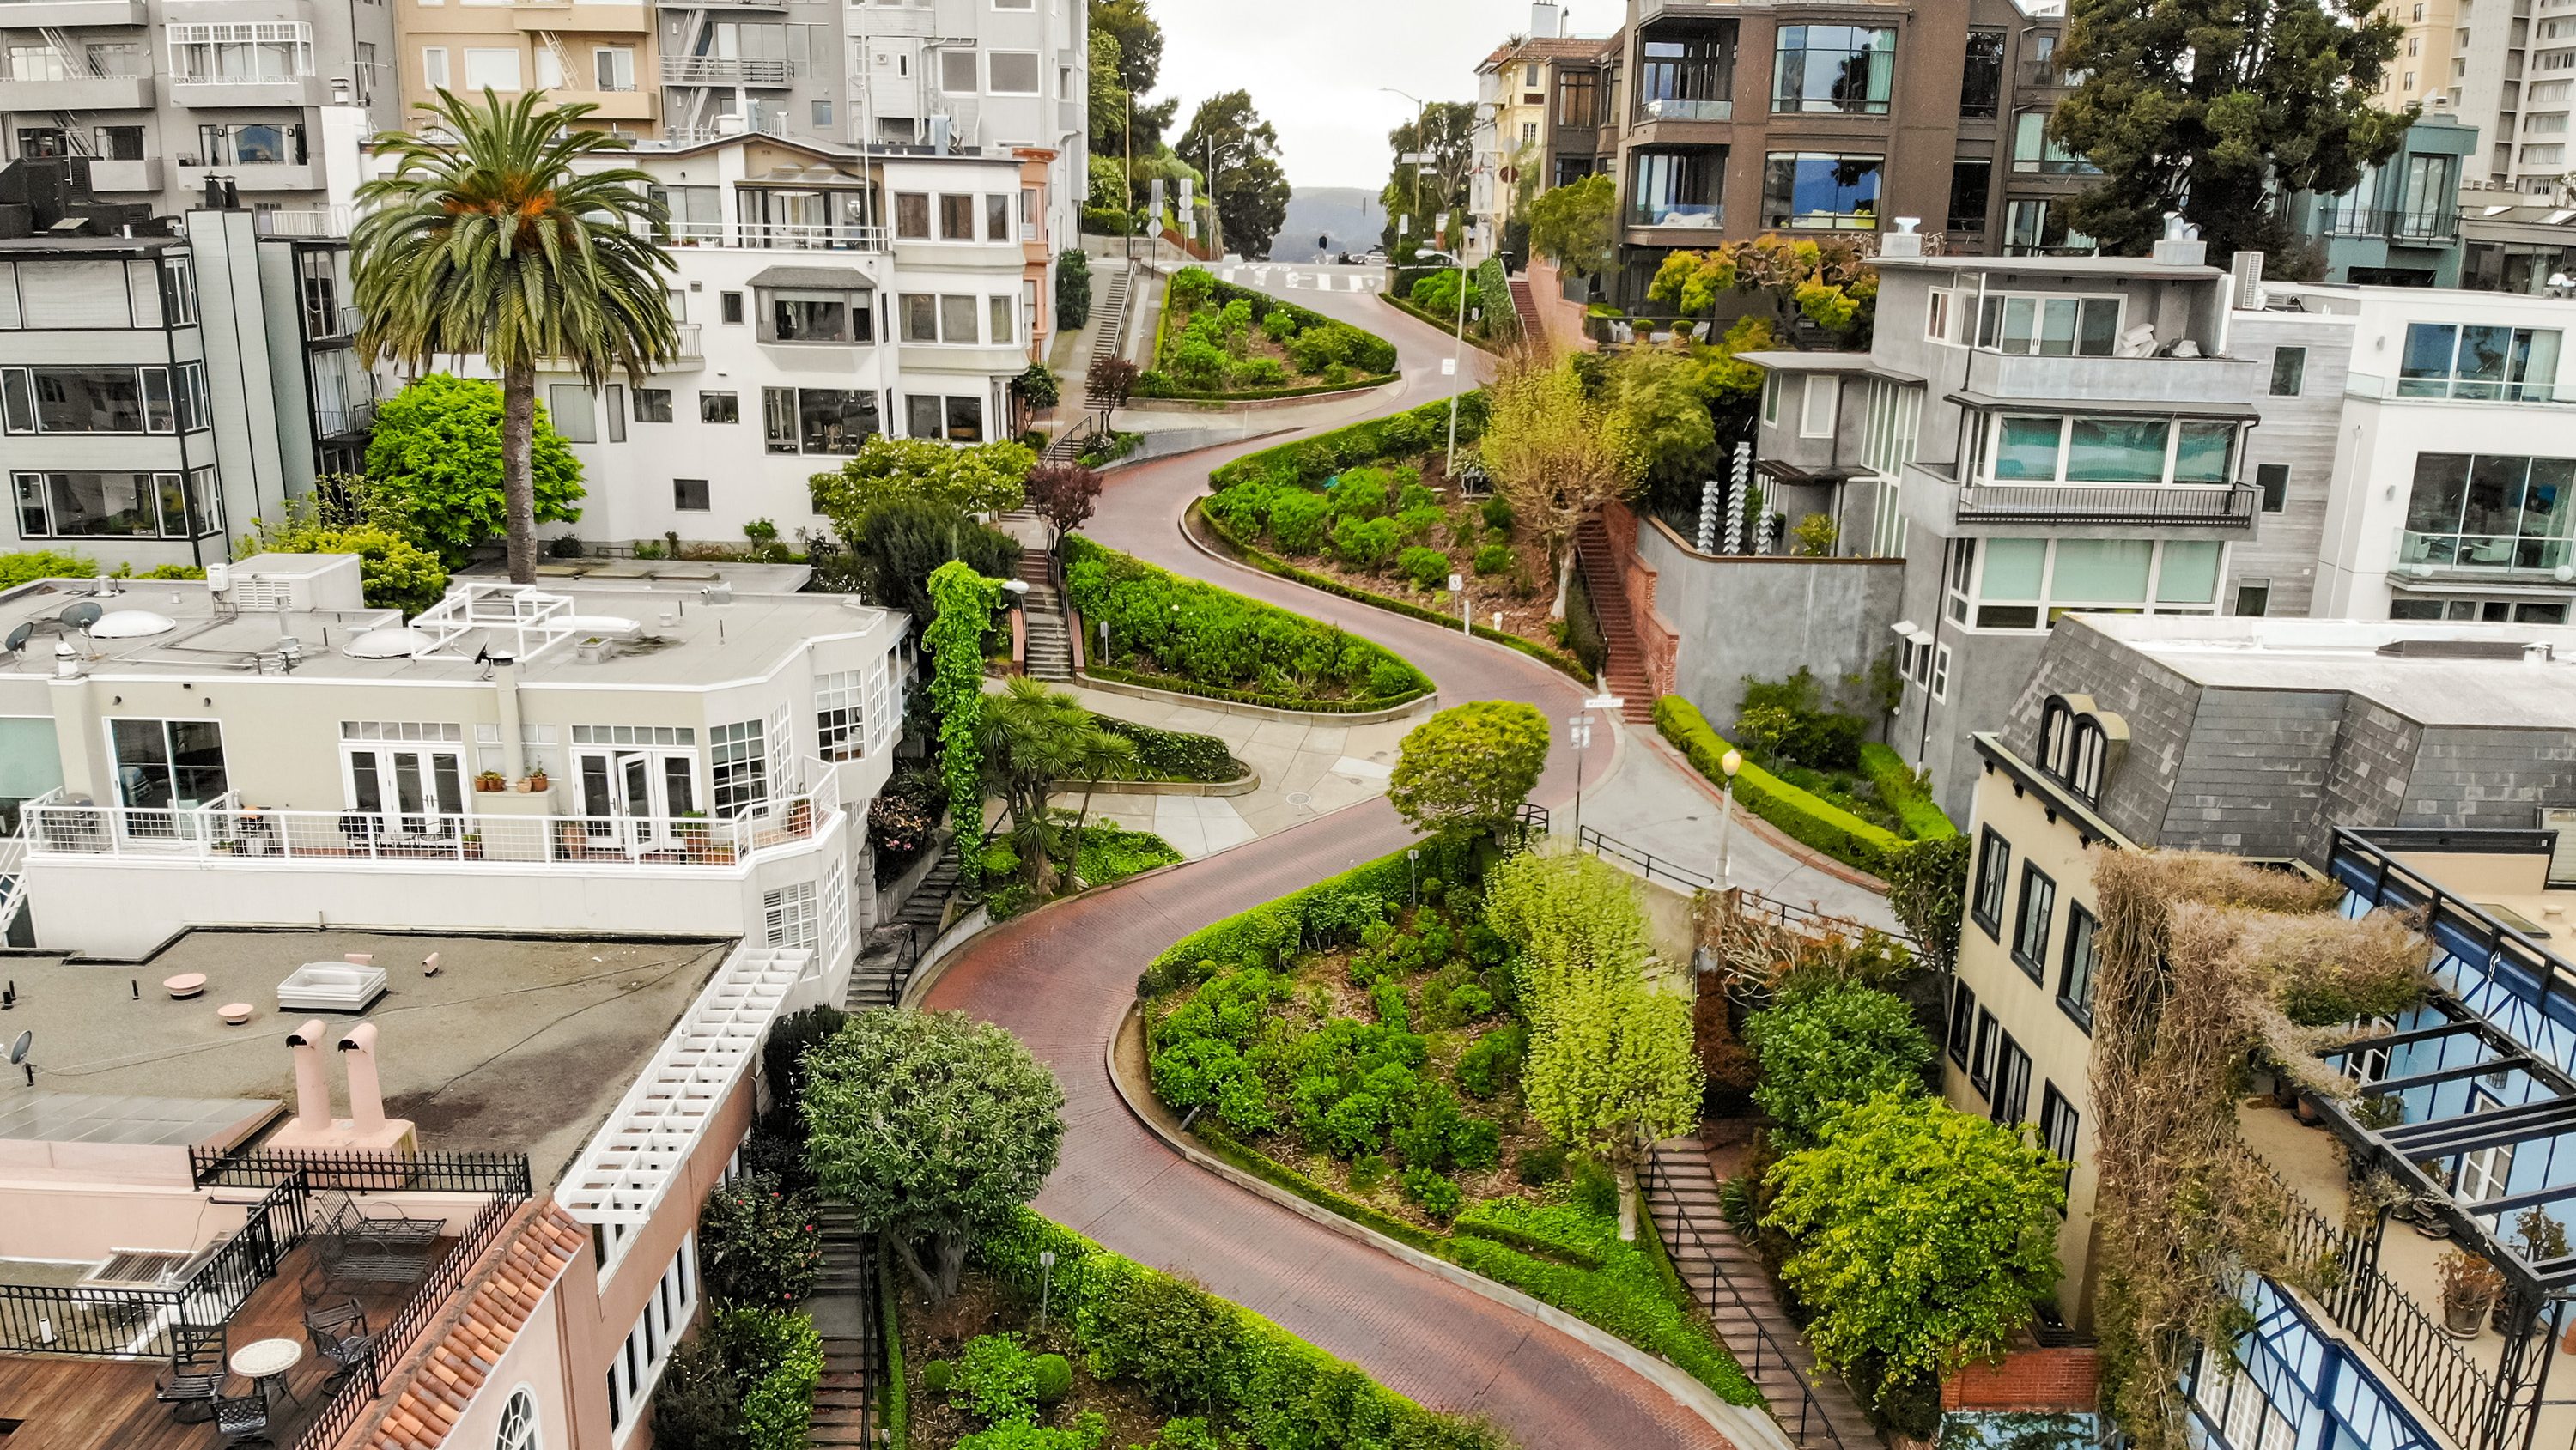 San Francisco&#039;s famously crooked Lombard Street during lockdown.